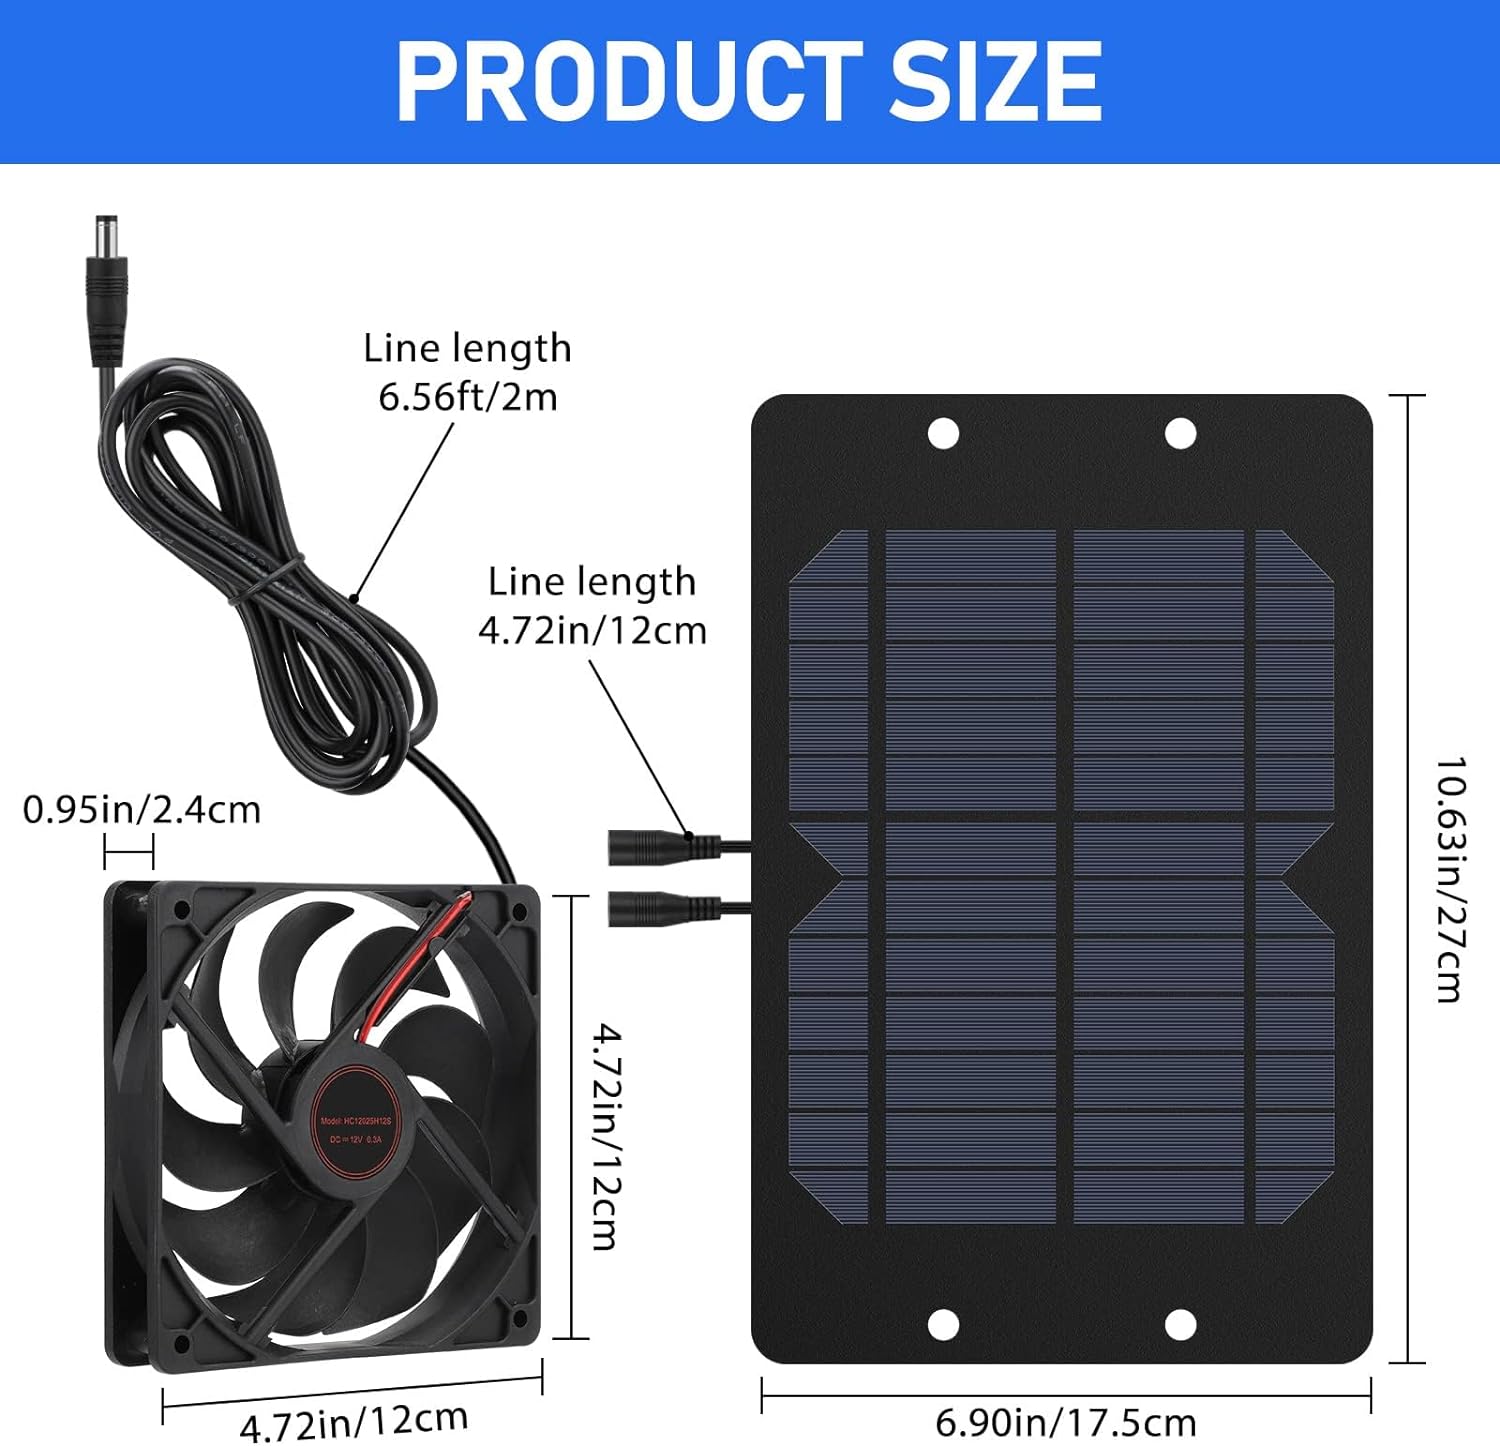 EEEKit Solar Panel Fans Kit, 10W DC 12V Solar Panel Powered Dual Fan with 2m Cable, Waterproof Outdoor Solar Exhaust Ventilation Fan for Greenhouse, Chicken Coops, Shed, Dog House, Window Exhaust, RV